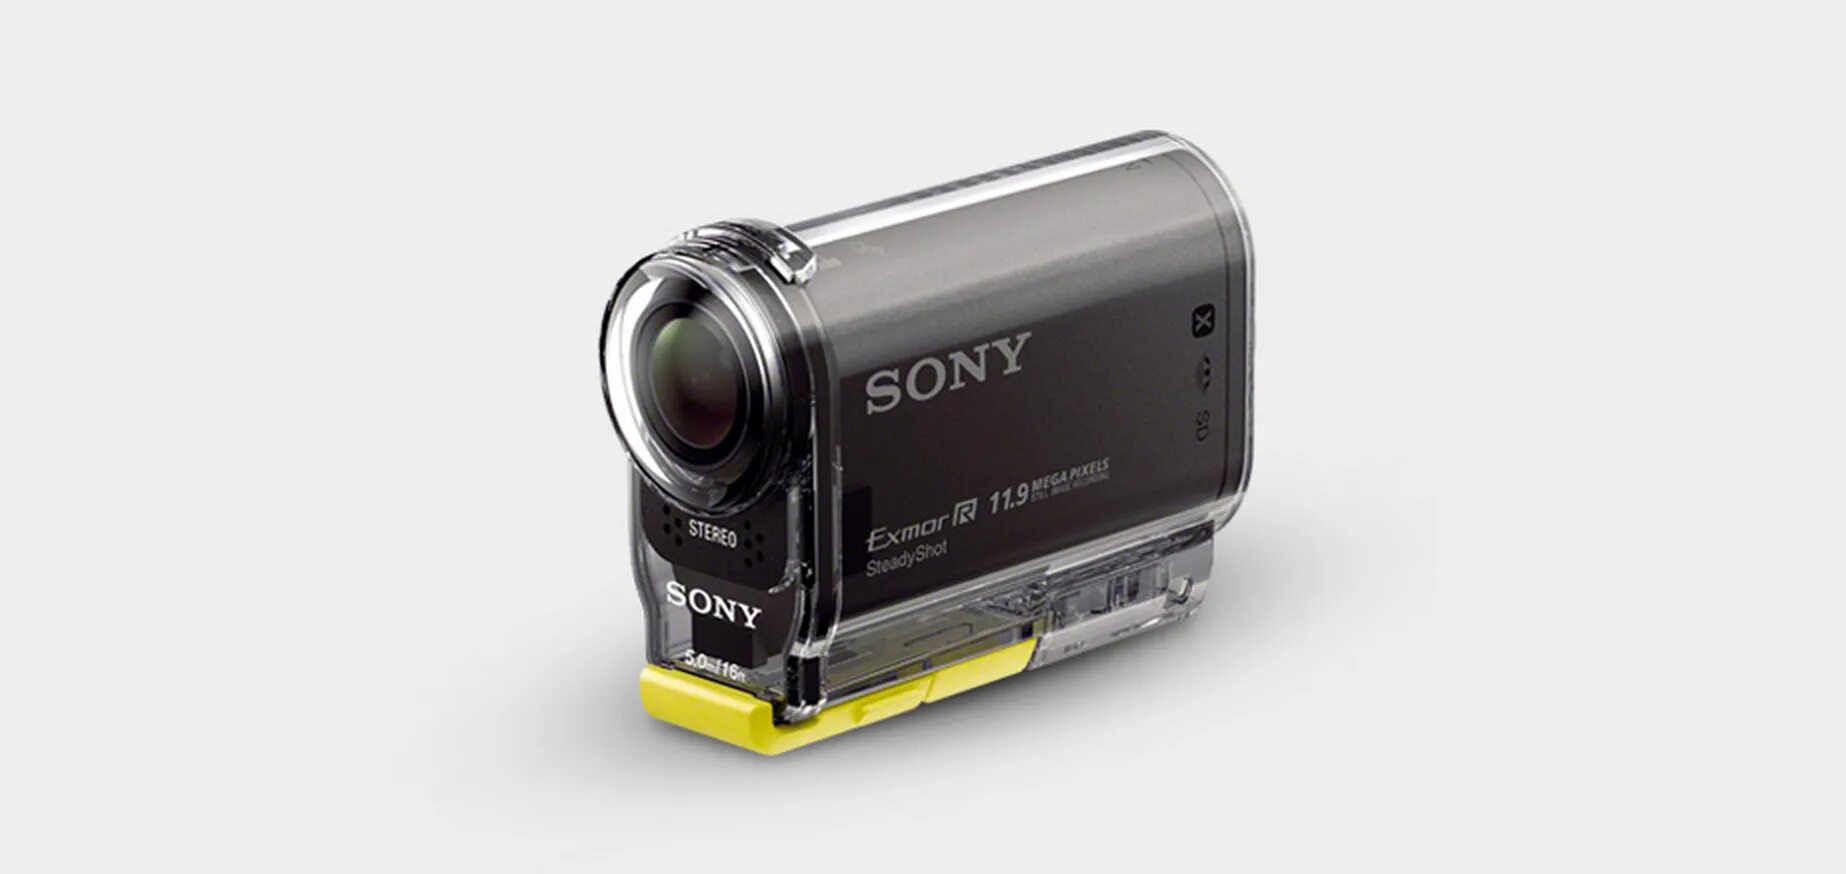 Sony Action cam 2020. Action камера Sony HDR-as30v. Sony HDR as30v. Sony Exmor r 11.9. 30 action